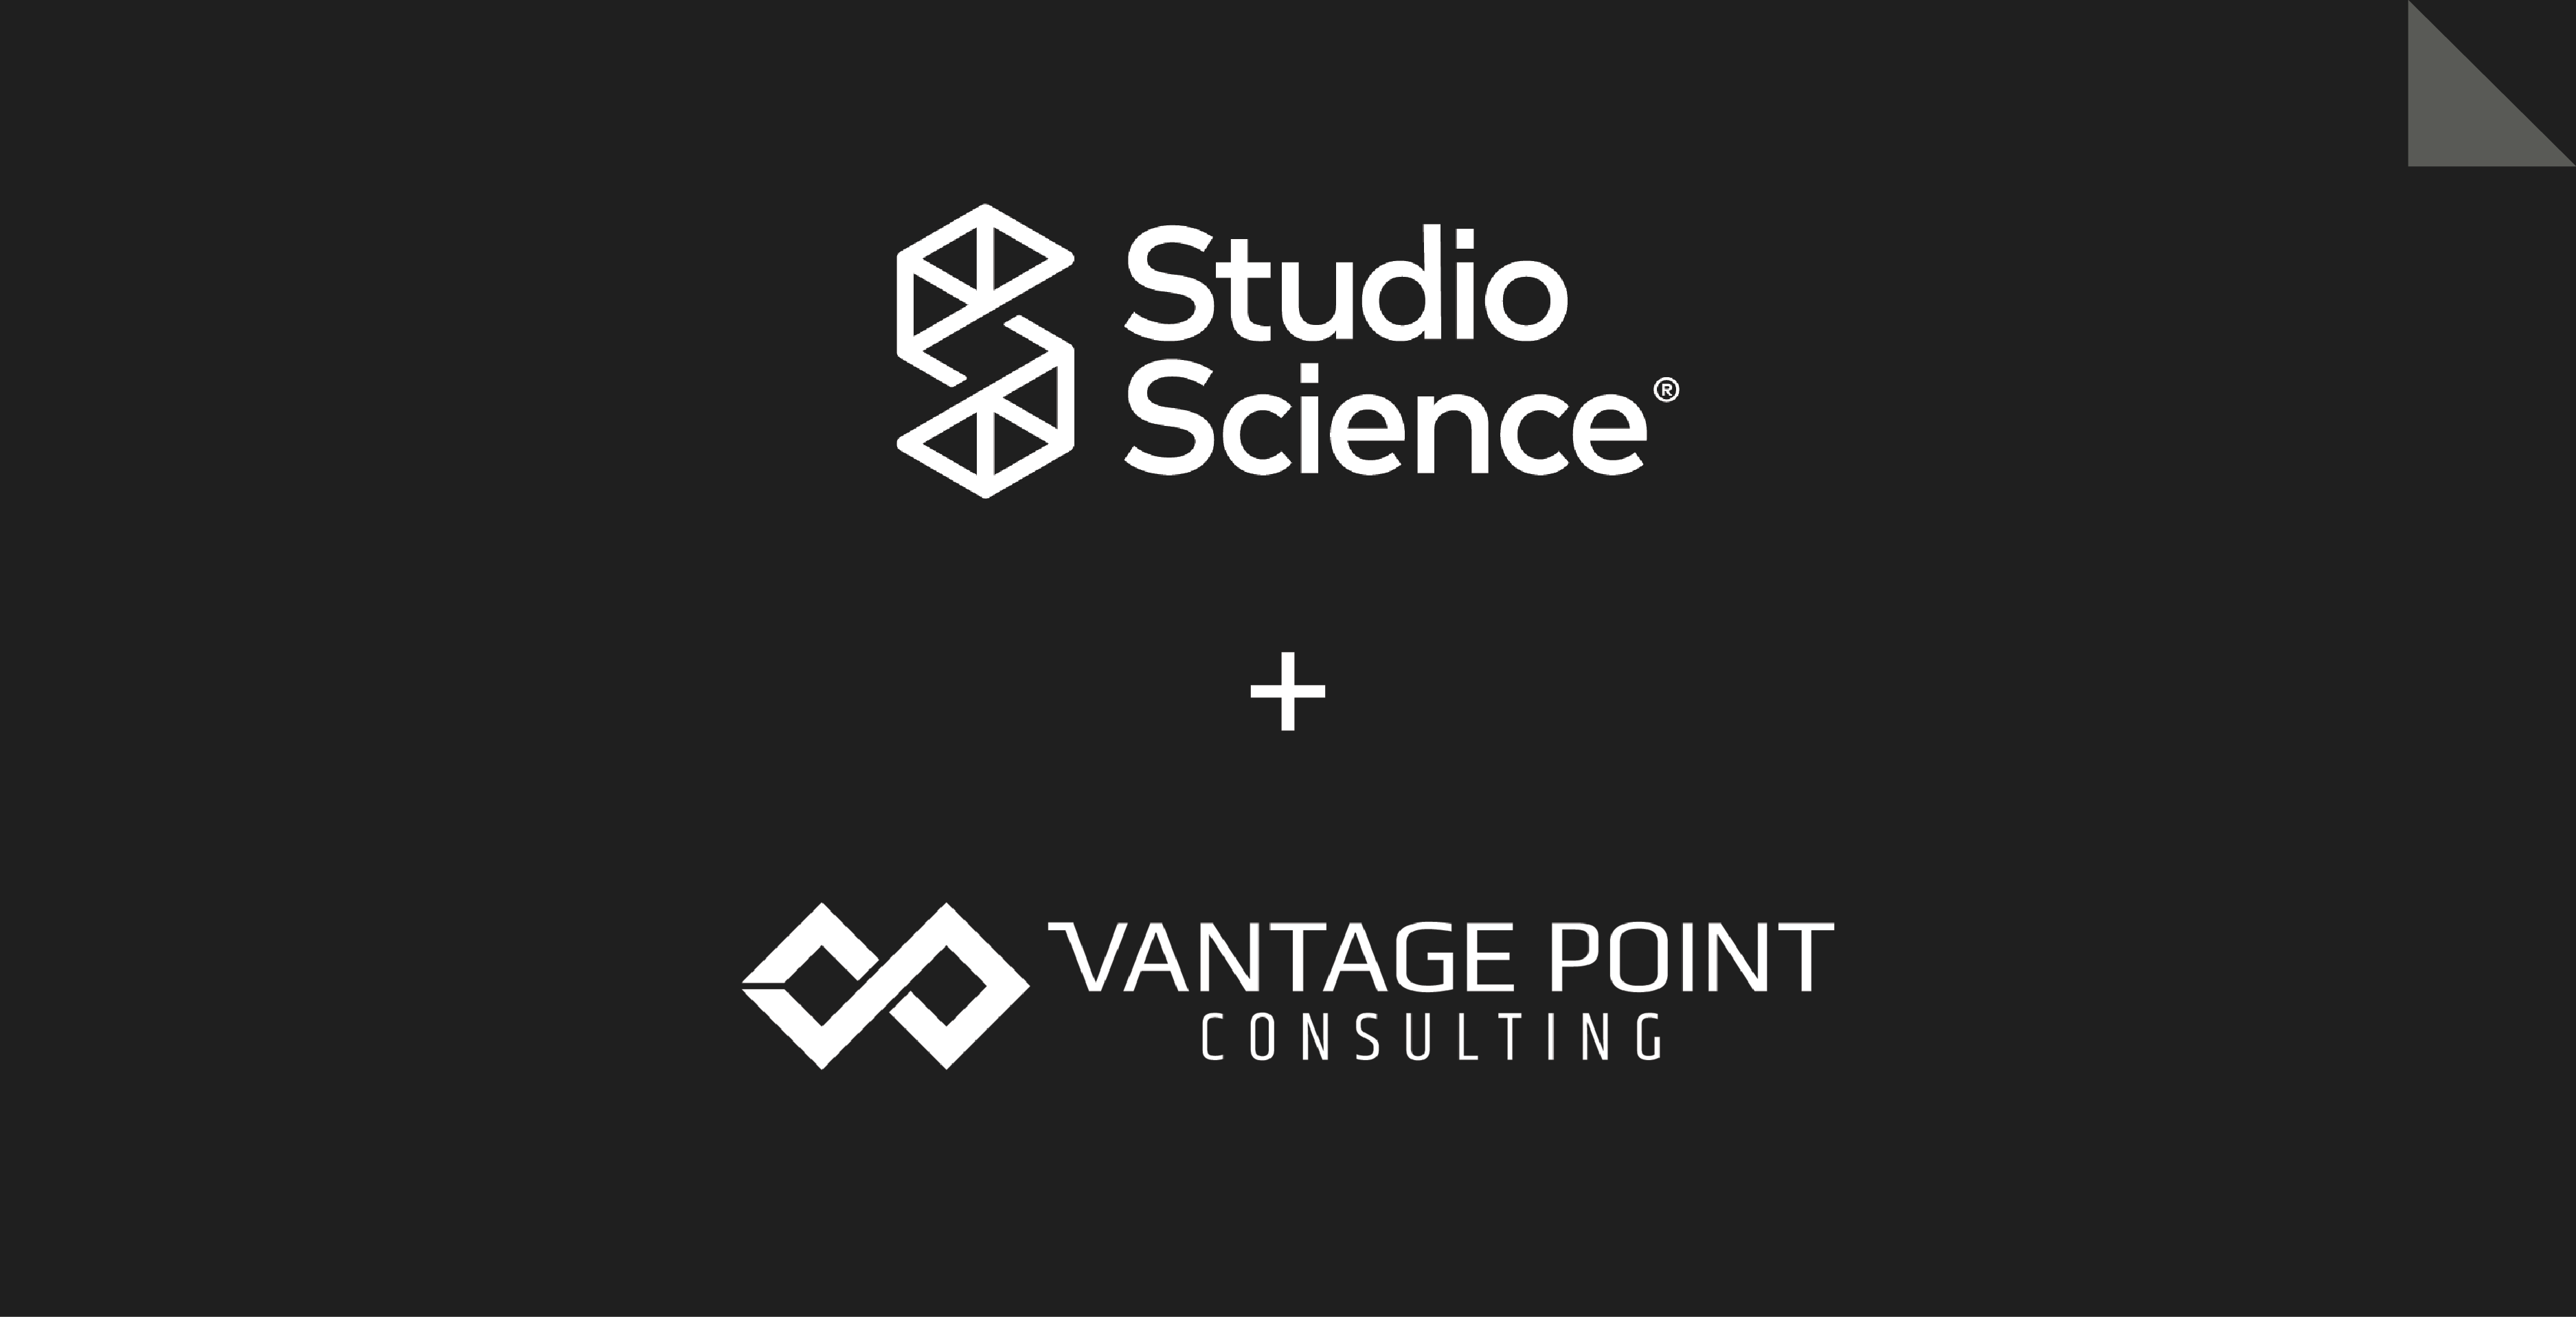 STUDIO SCIENCE ANNOUNCES STRATEGIC PARTNERSHIP WITH VANTAGE POINT CONSULTING